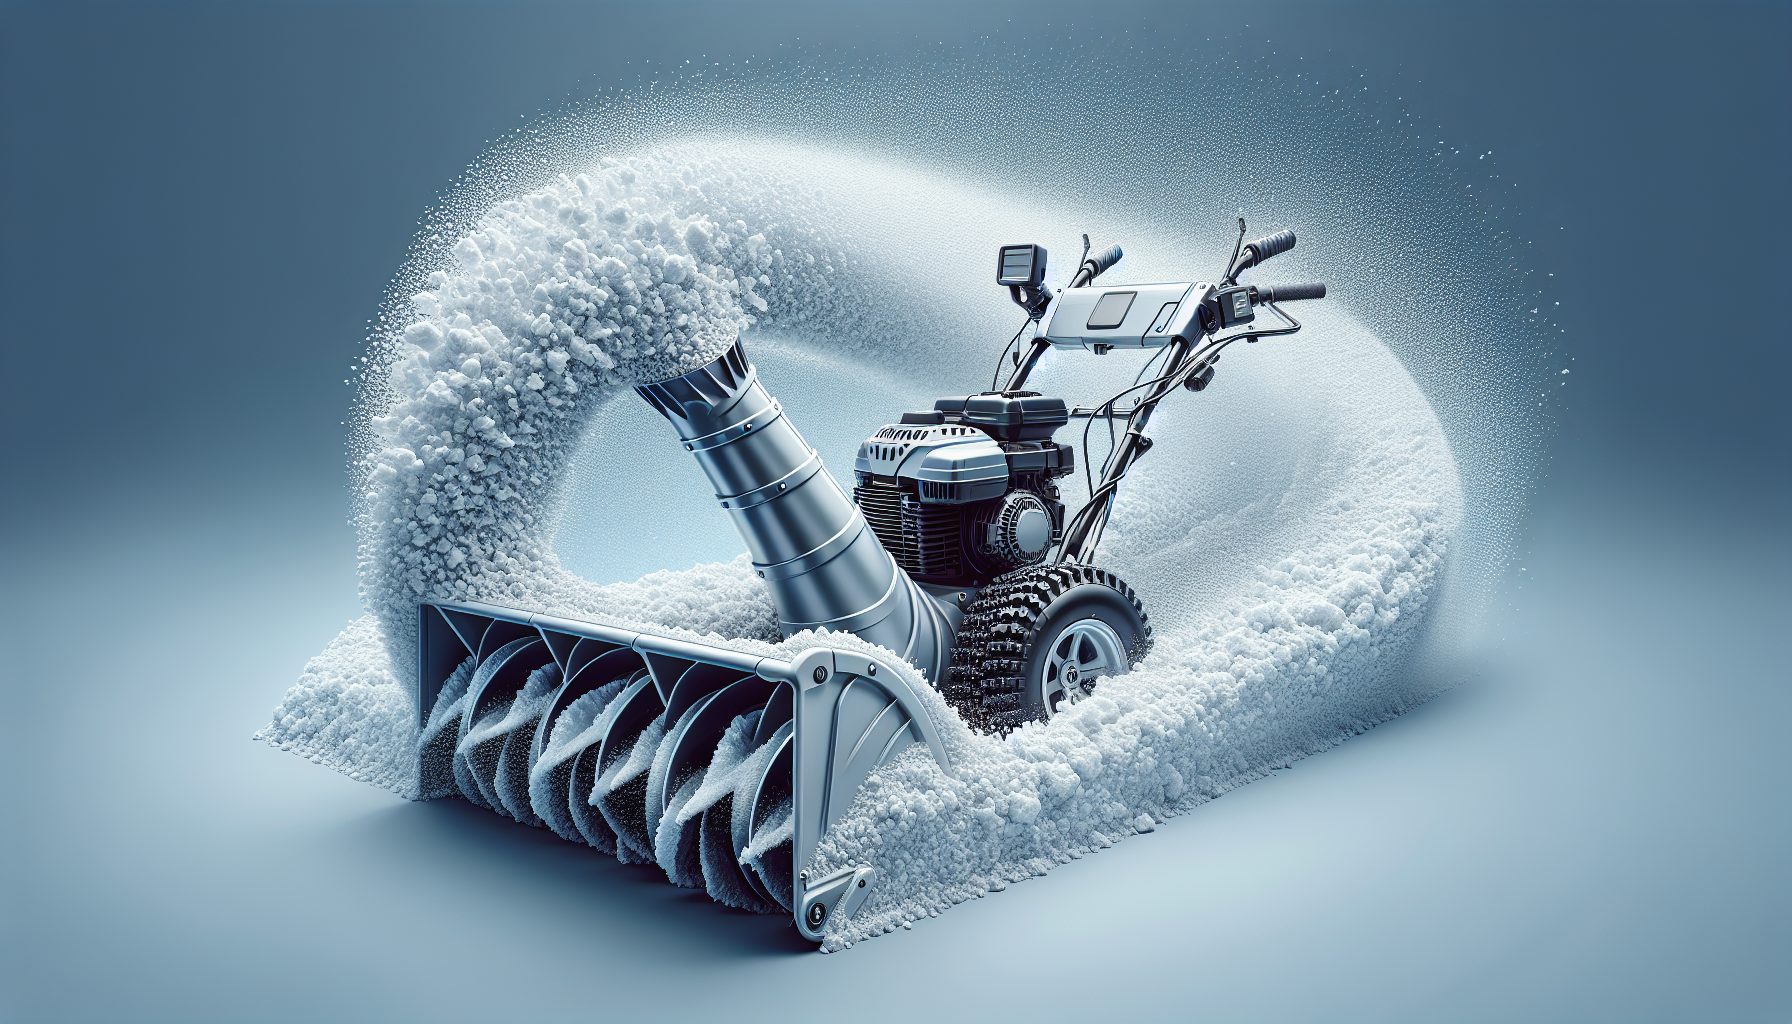 What Are Five Things To Consider When Purchasing A Snow Blower?